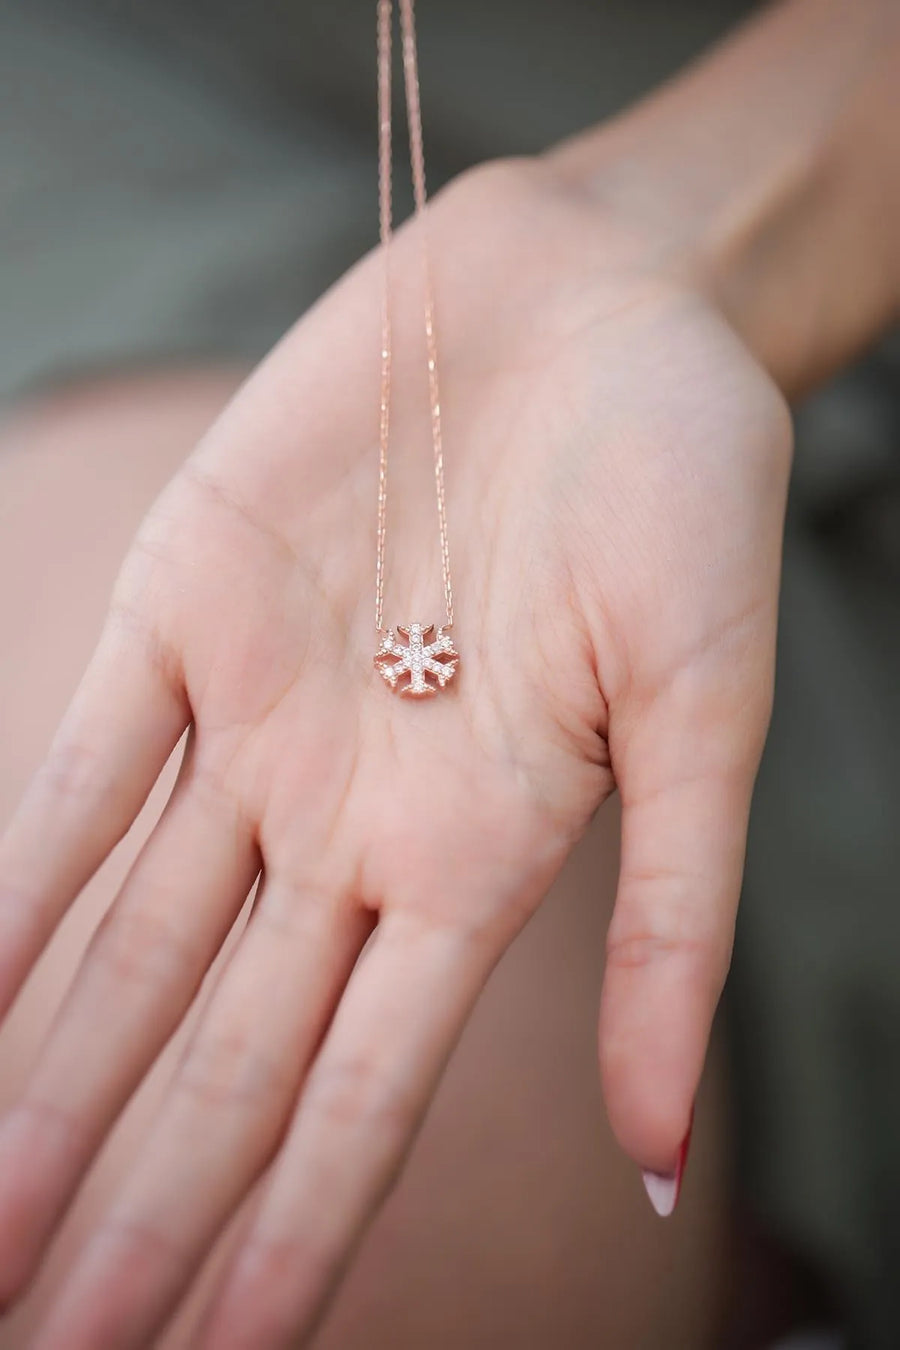 Snowflake Model Rose Necklace